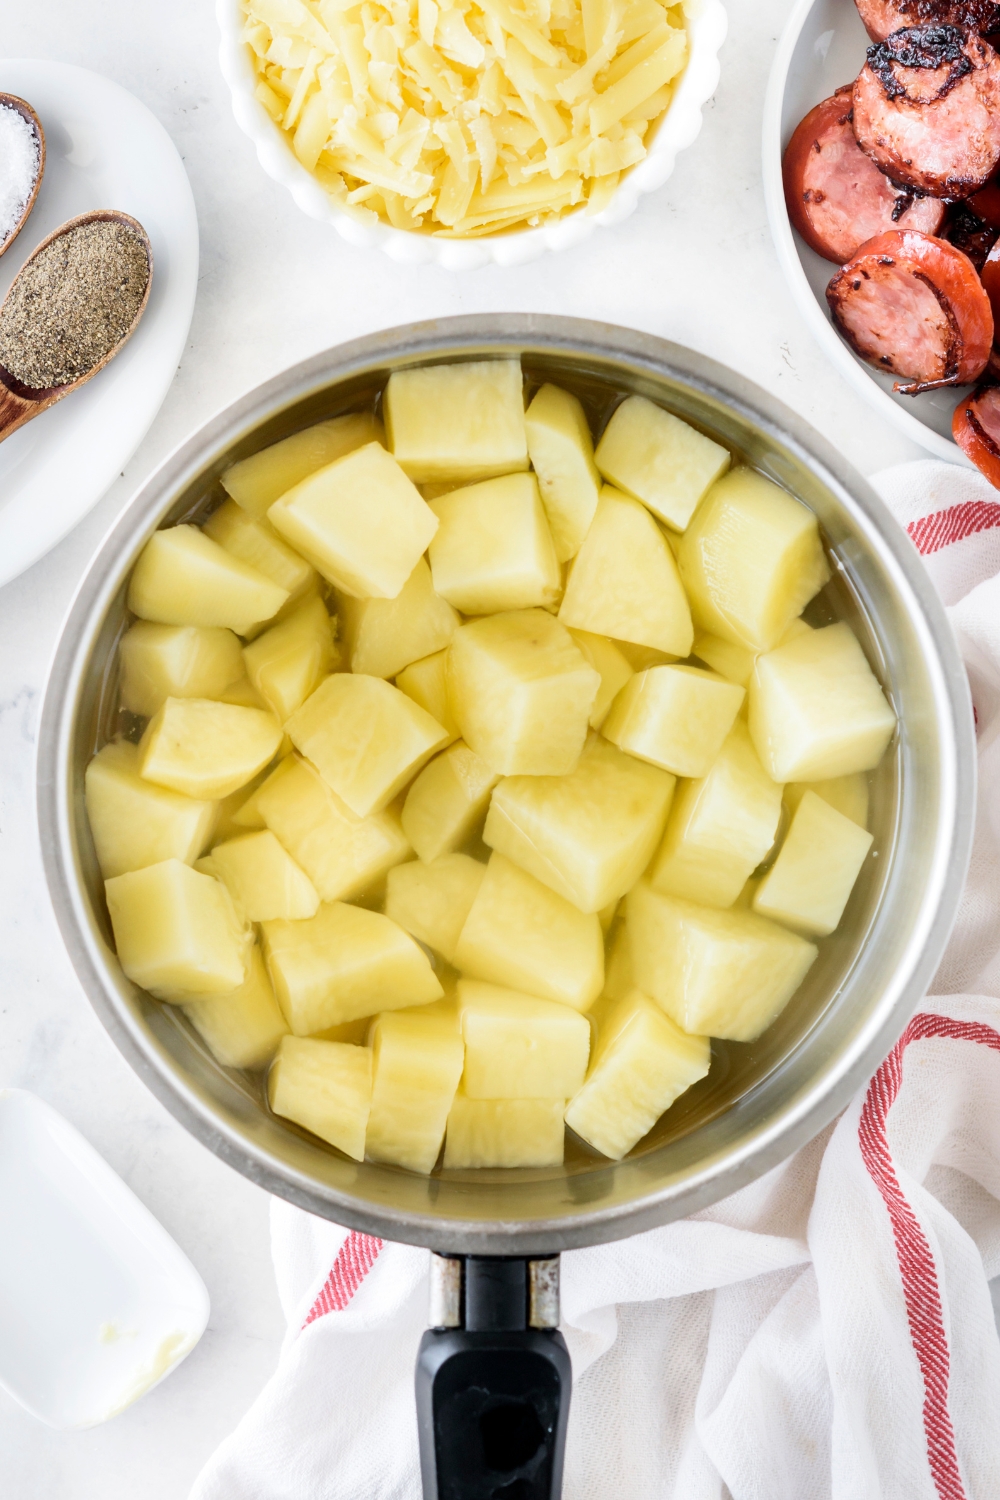 A pot filled with peeled and cubed potatoes in water.